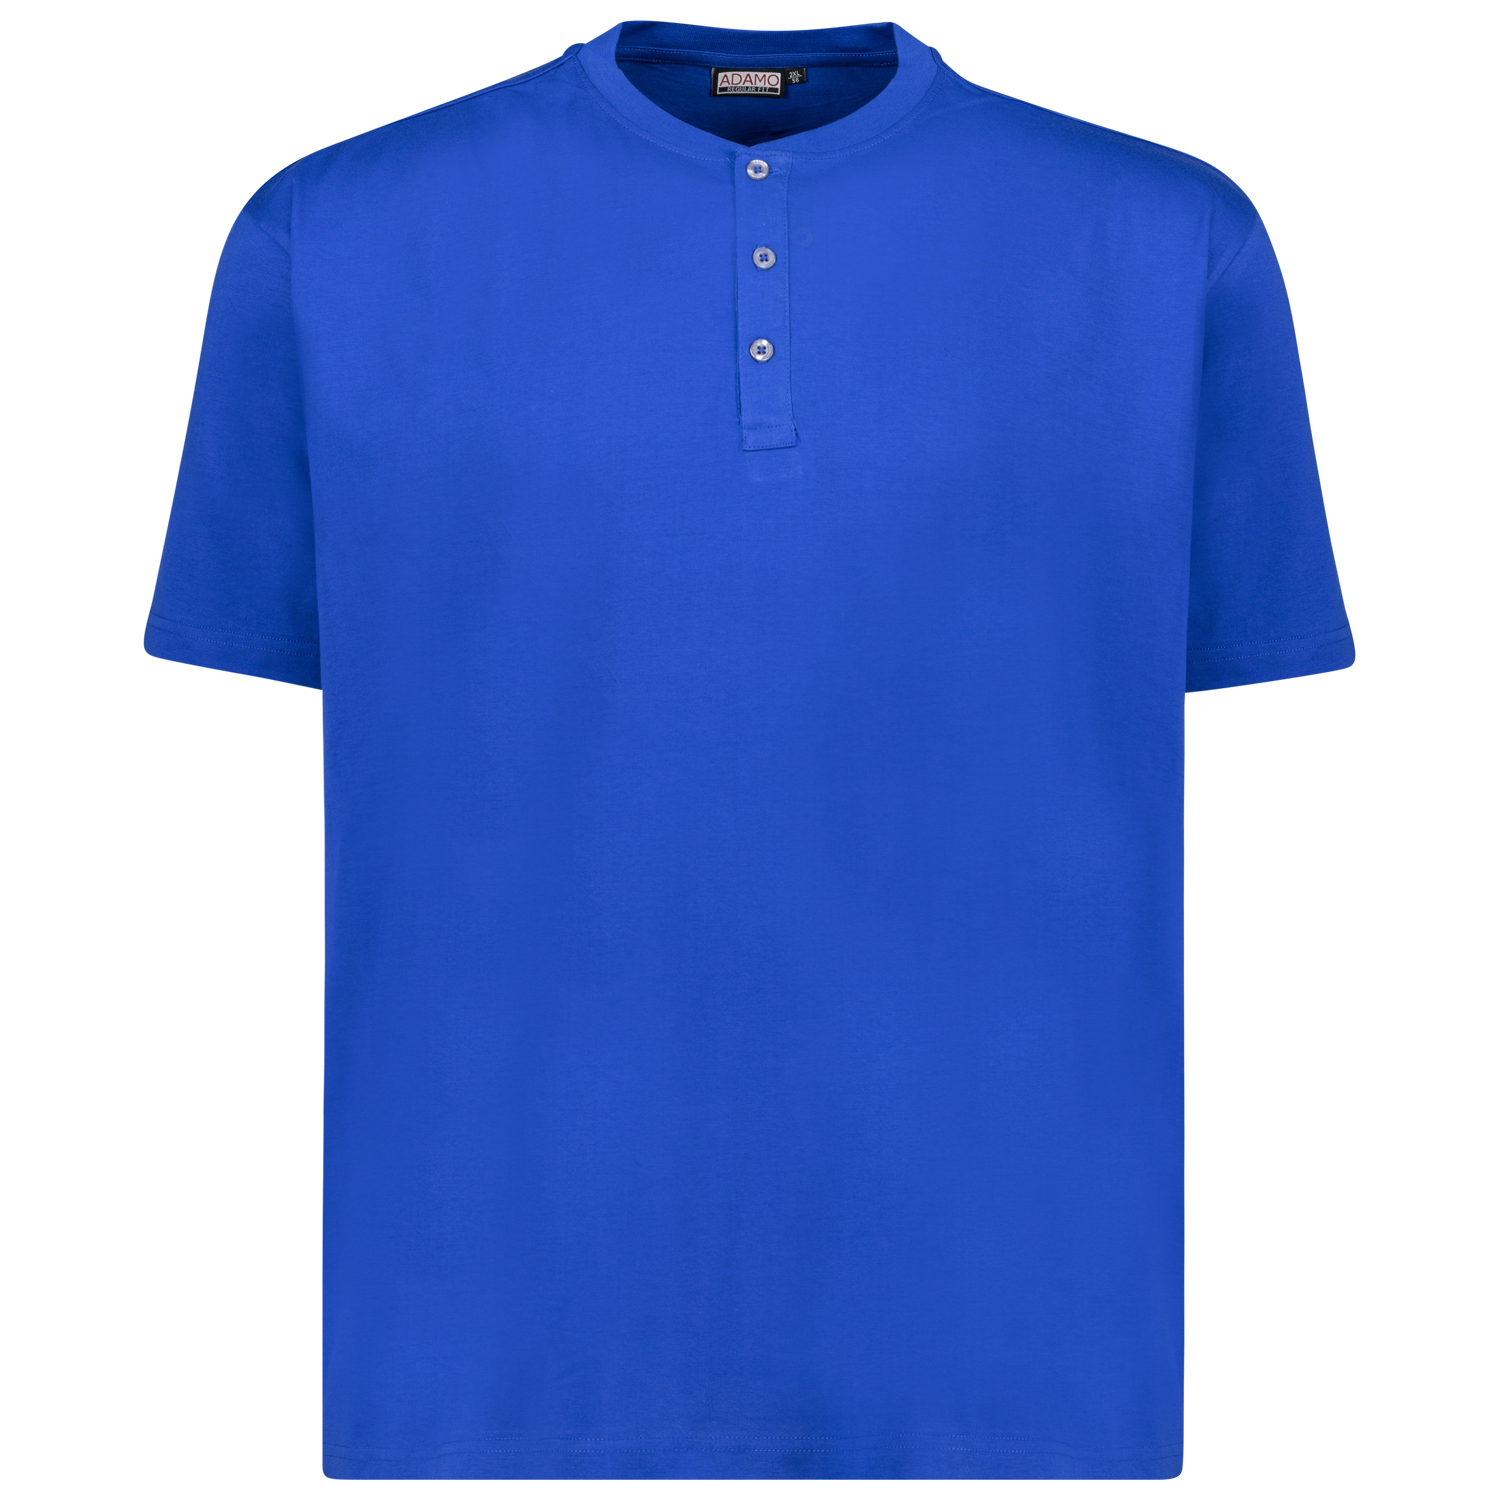 T-shirt in royal blue series Silas regular fit by Adamo for men up to oversize 10XL